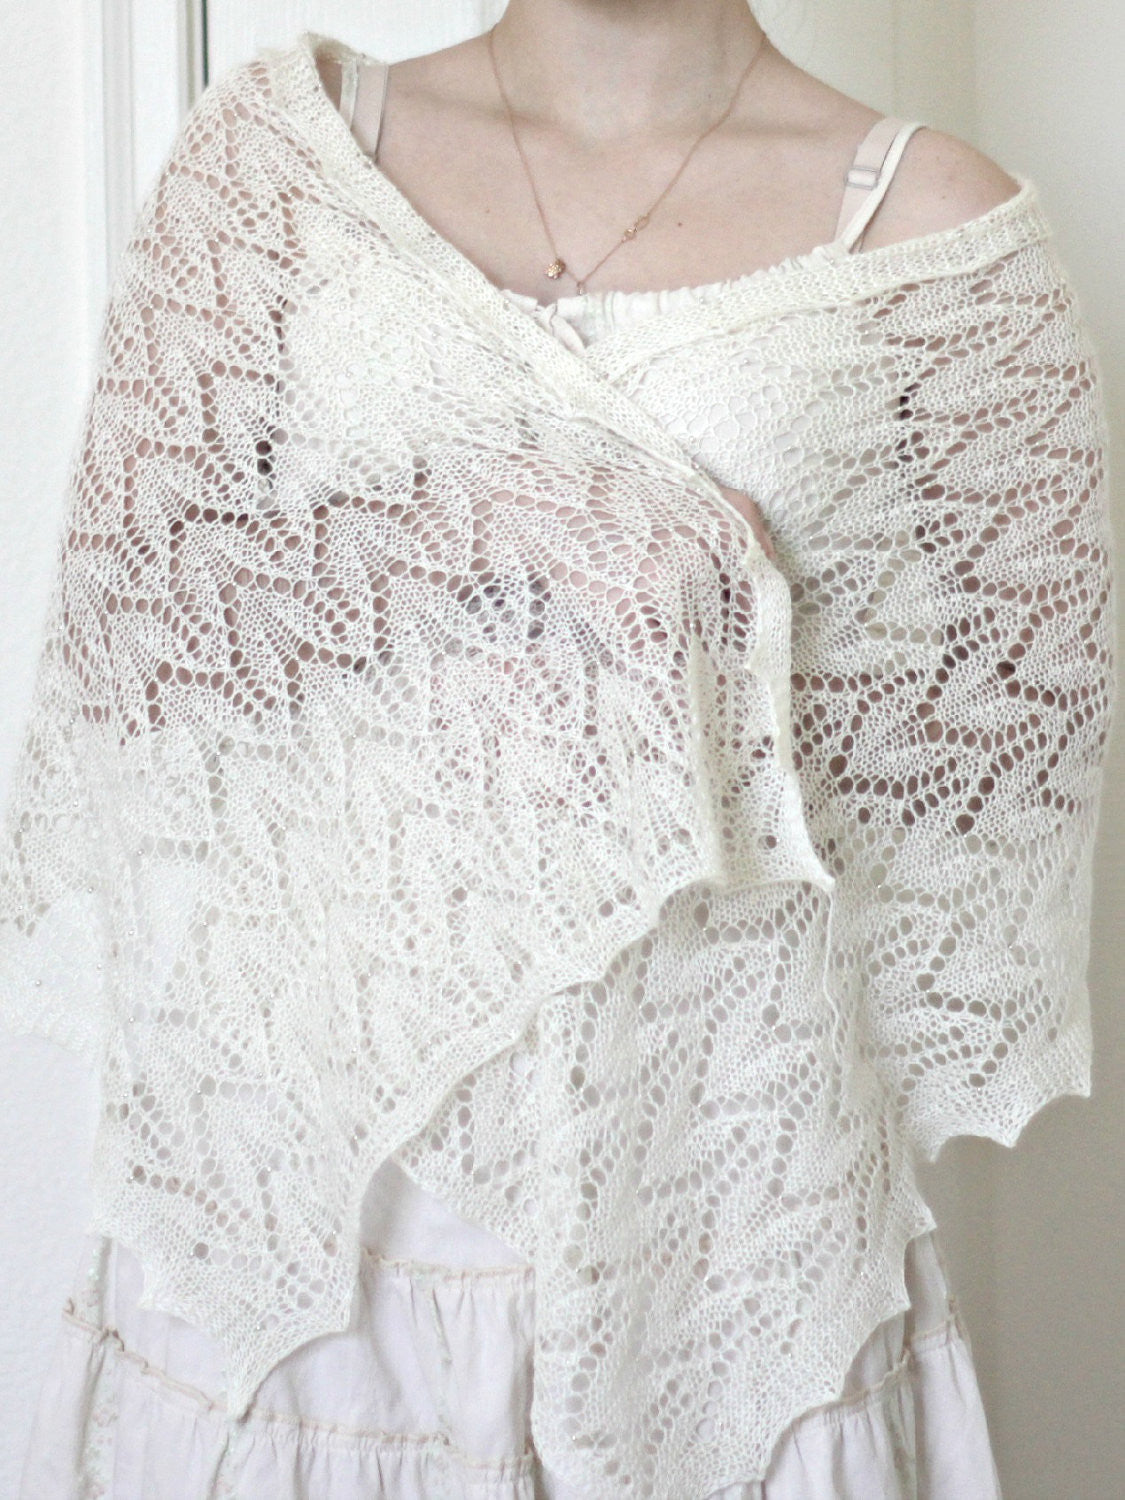 Knitting pattern for Chevron Lace stole